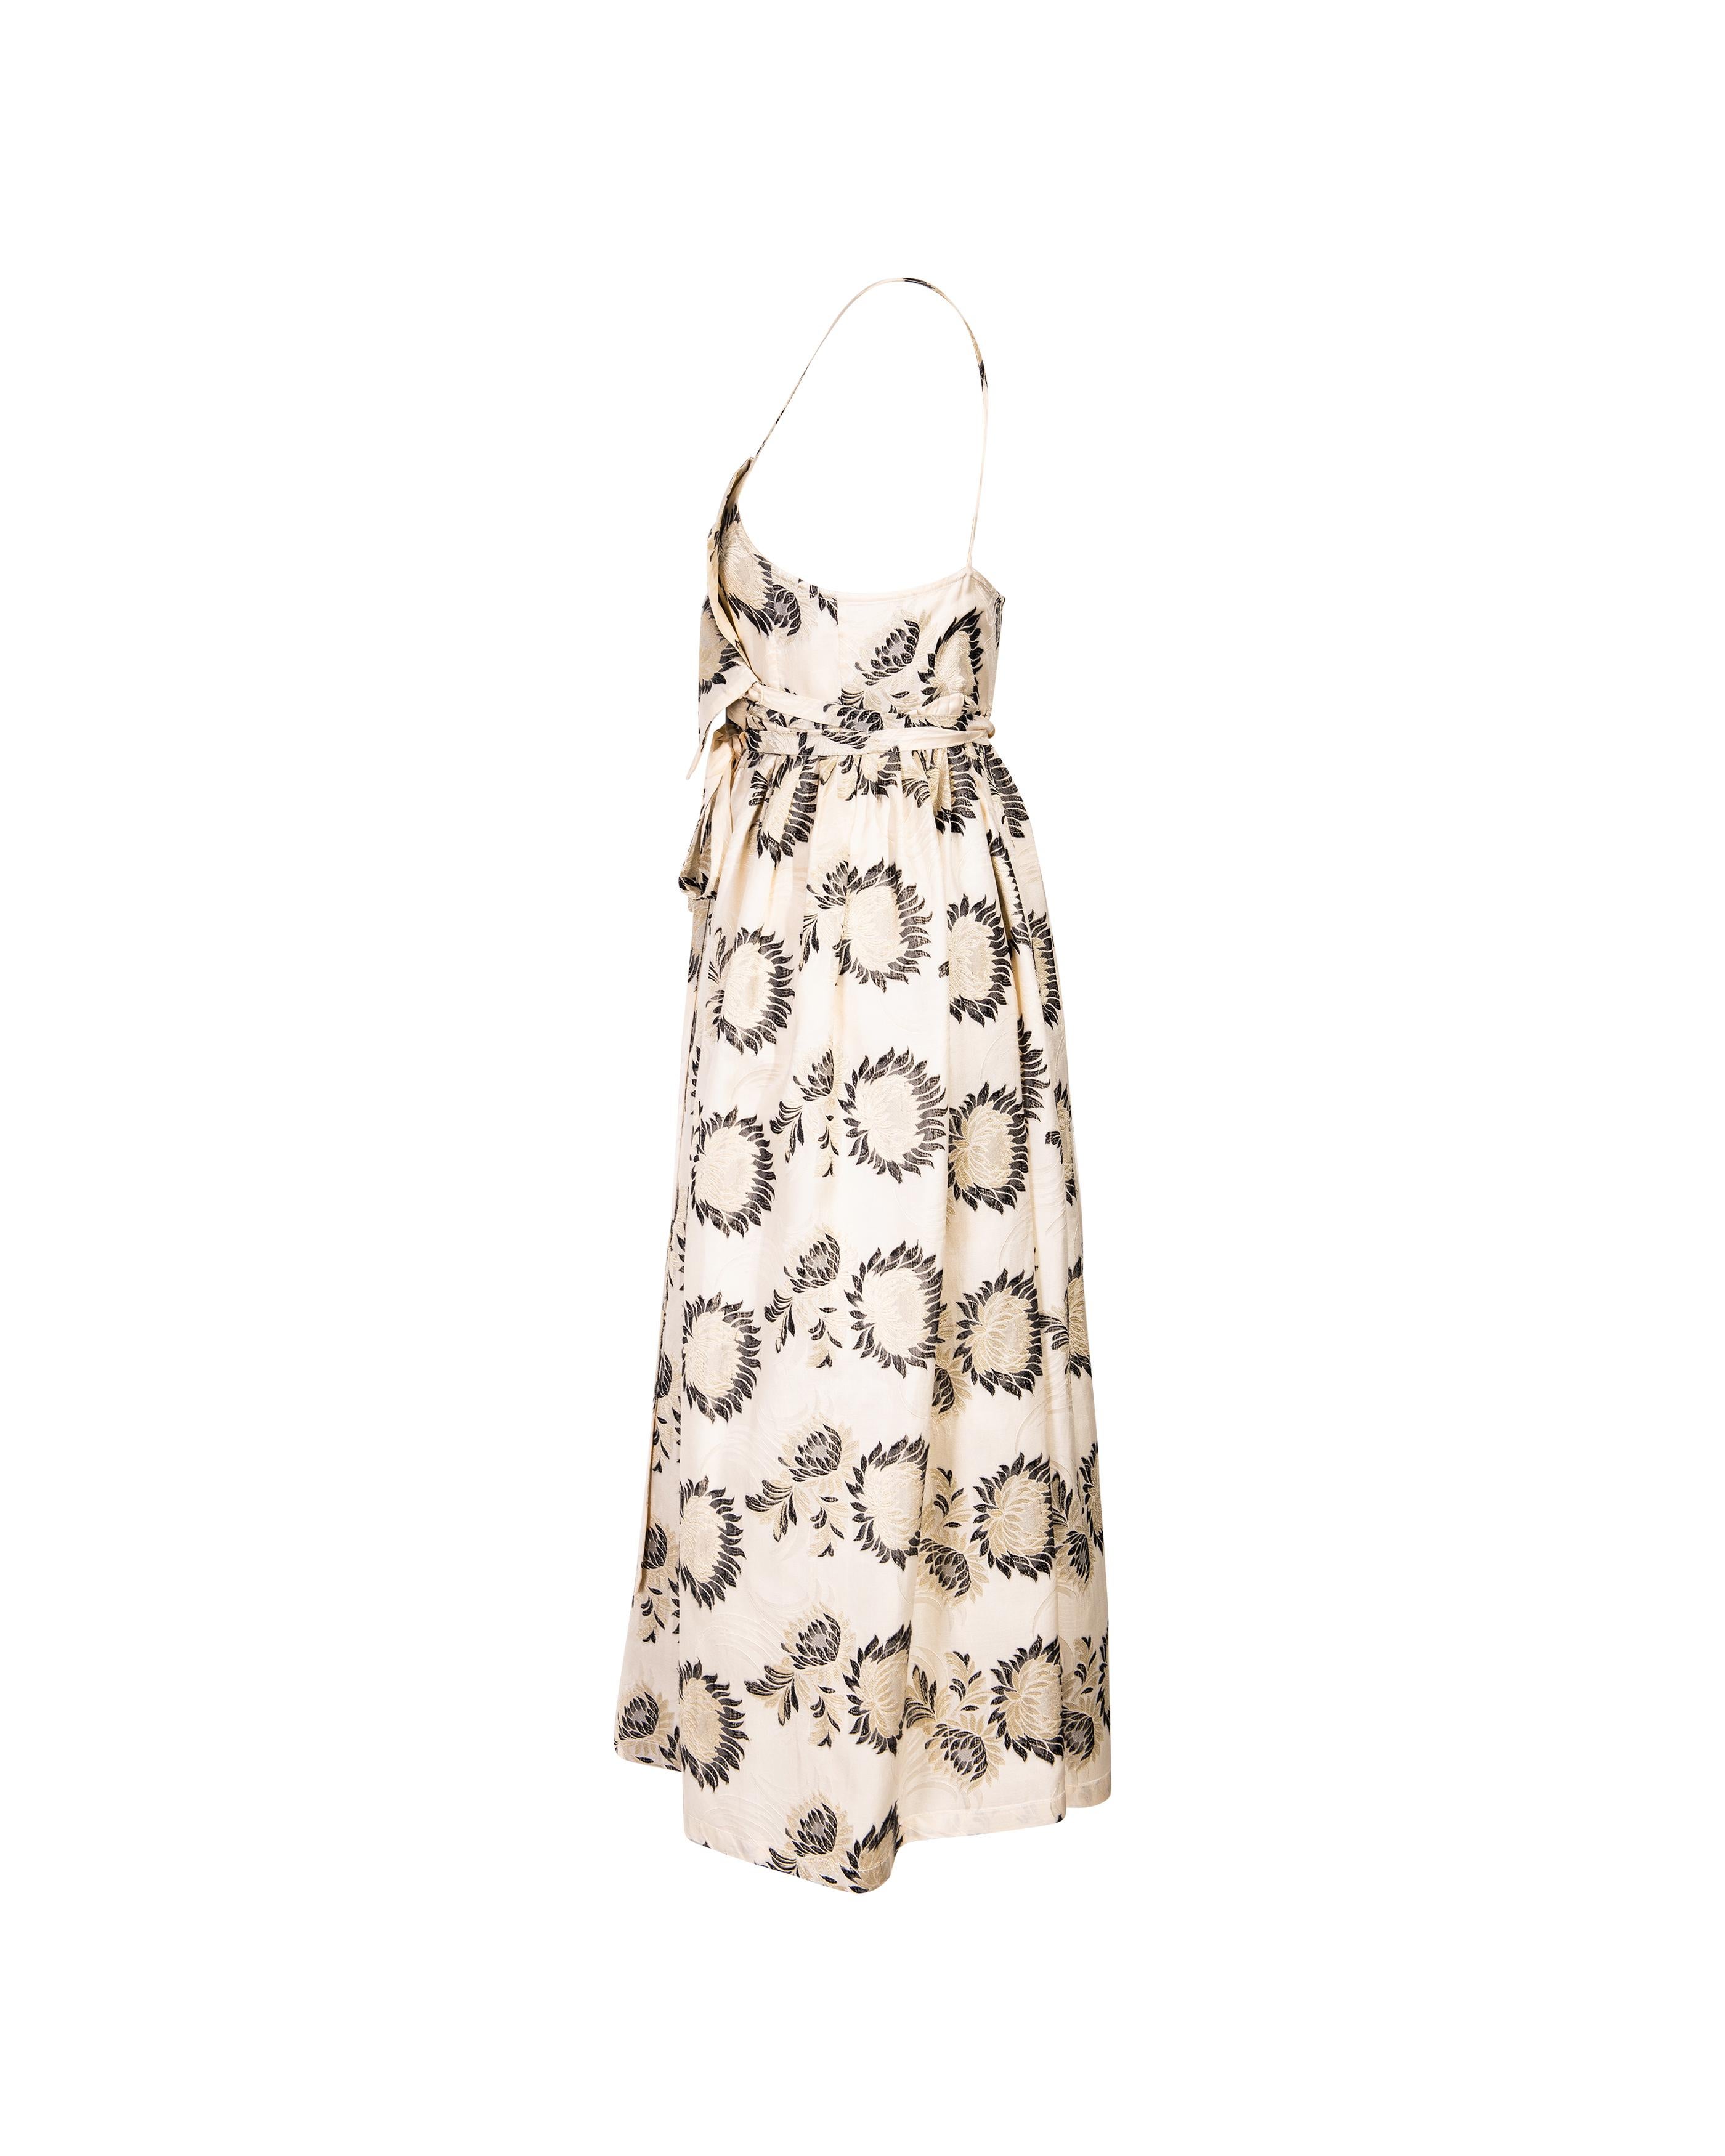 S/S 2005 Dries Van Noten floral print wrap dress. Cream sleeveless midi wrap dress with black and cream floral print throughout. Front ties wrap around waist and create fitted shape, with full flared skirt. 100% Silk. Thin spaghetti straps and